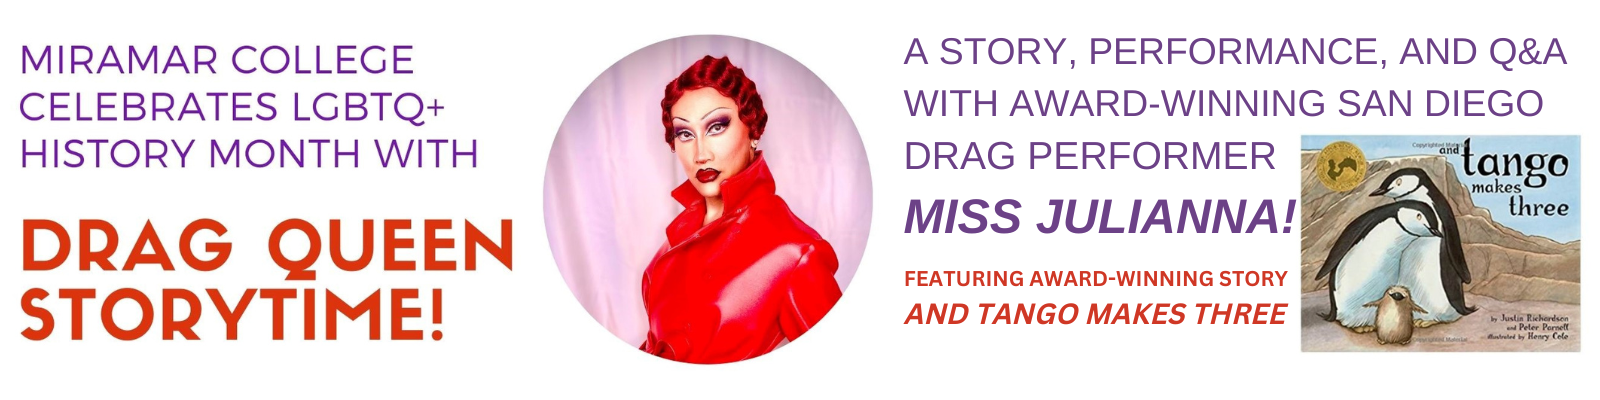 An event announcement banner, which reads, "Miramar College celebrates LGBTQ+ History Month with Drag Queen Storytime! A story, performance, and question and answer session with award-winning, San Diego Drag performer Miss Julianna! Featuring award-winning story, titled And Tango Makes Three." The graphic includes a photo of Miss Julianna and a photo of the book cover for And Tango Makes Three.